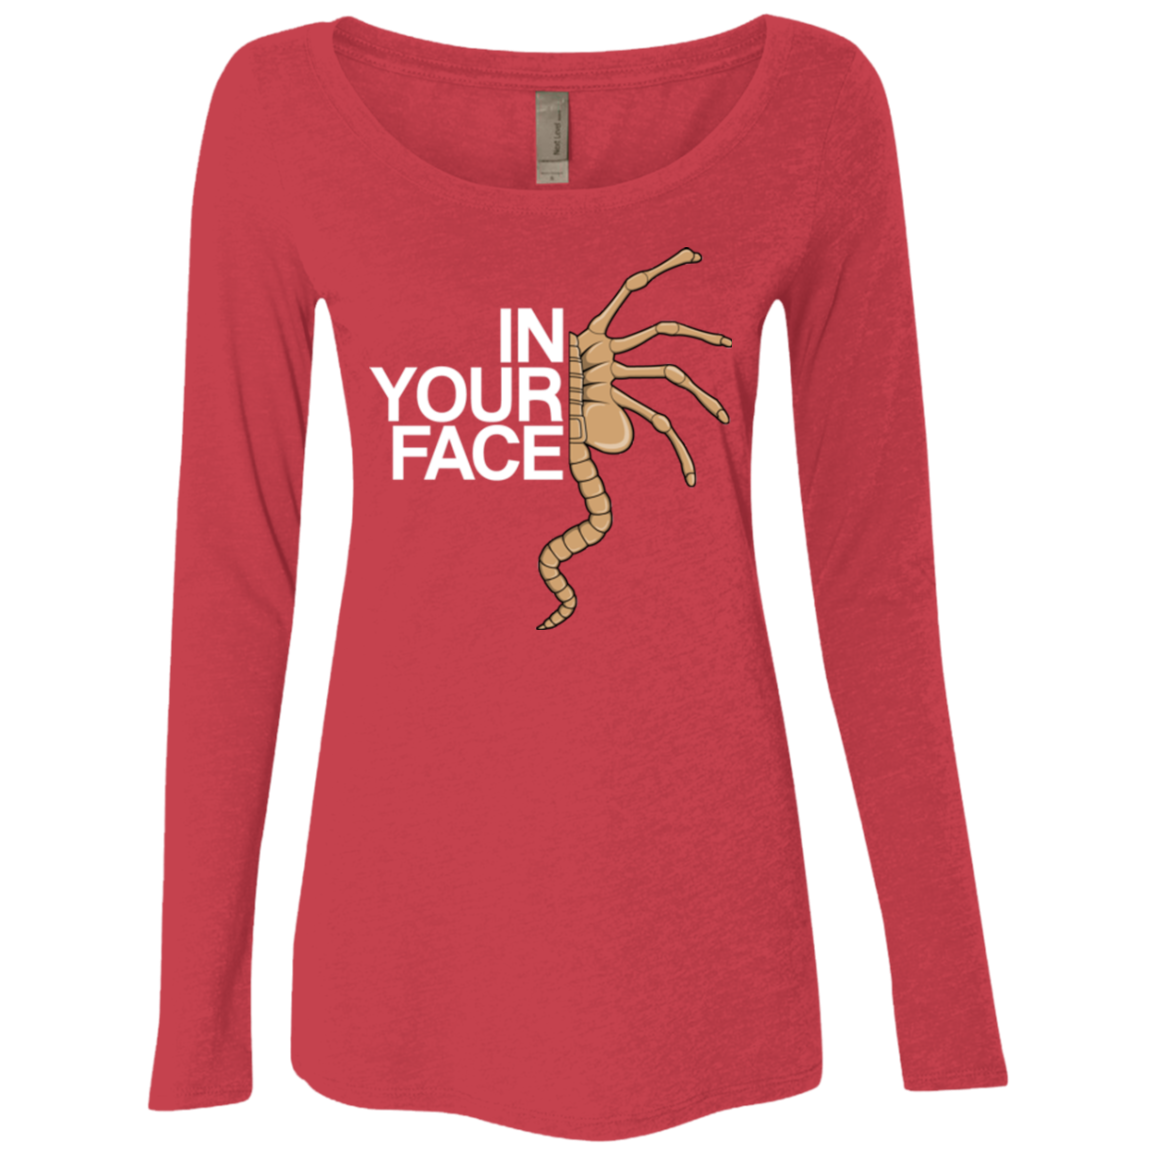 IN YOUR FACE Women's Triblend Long Sleeve Shirt